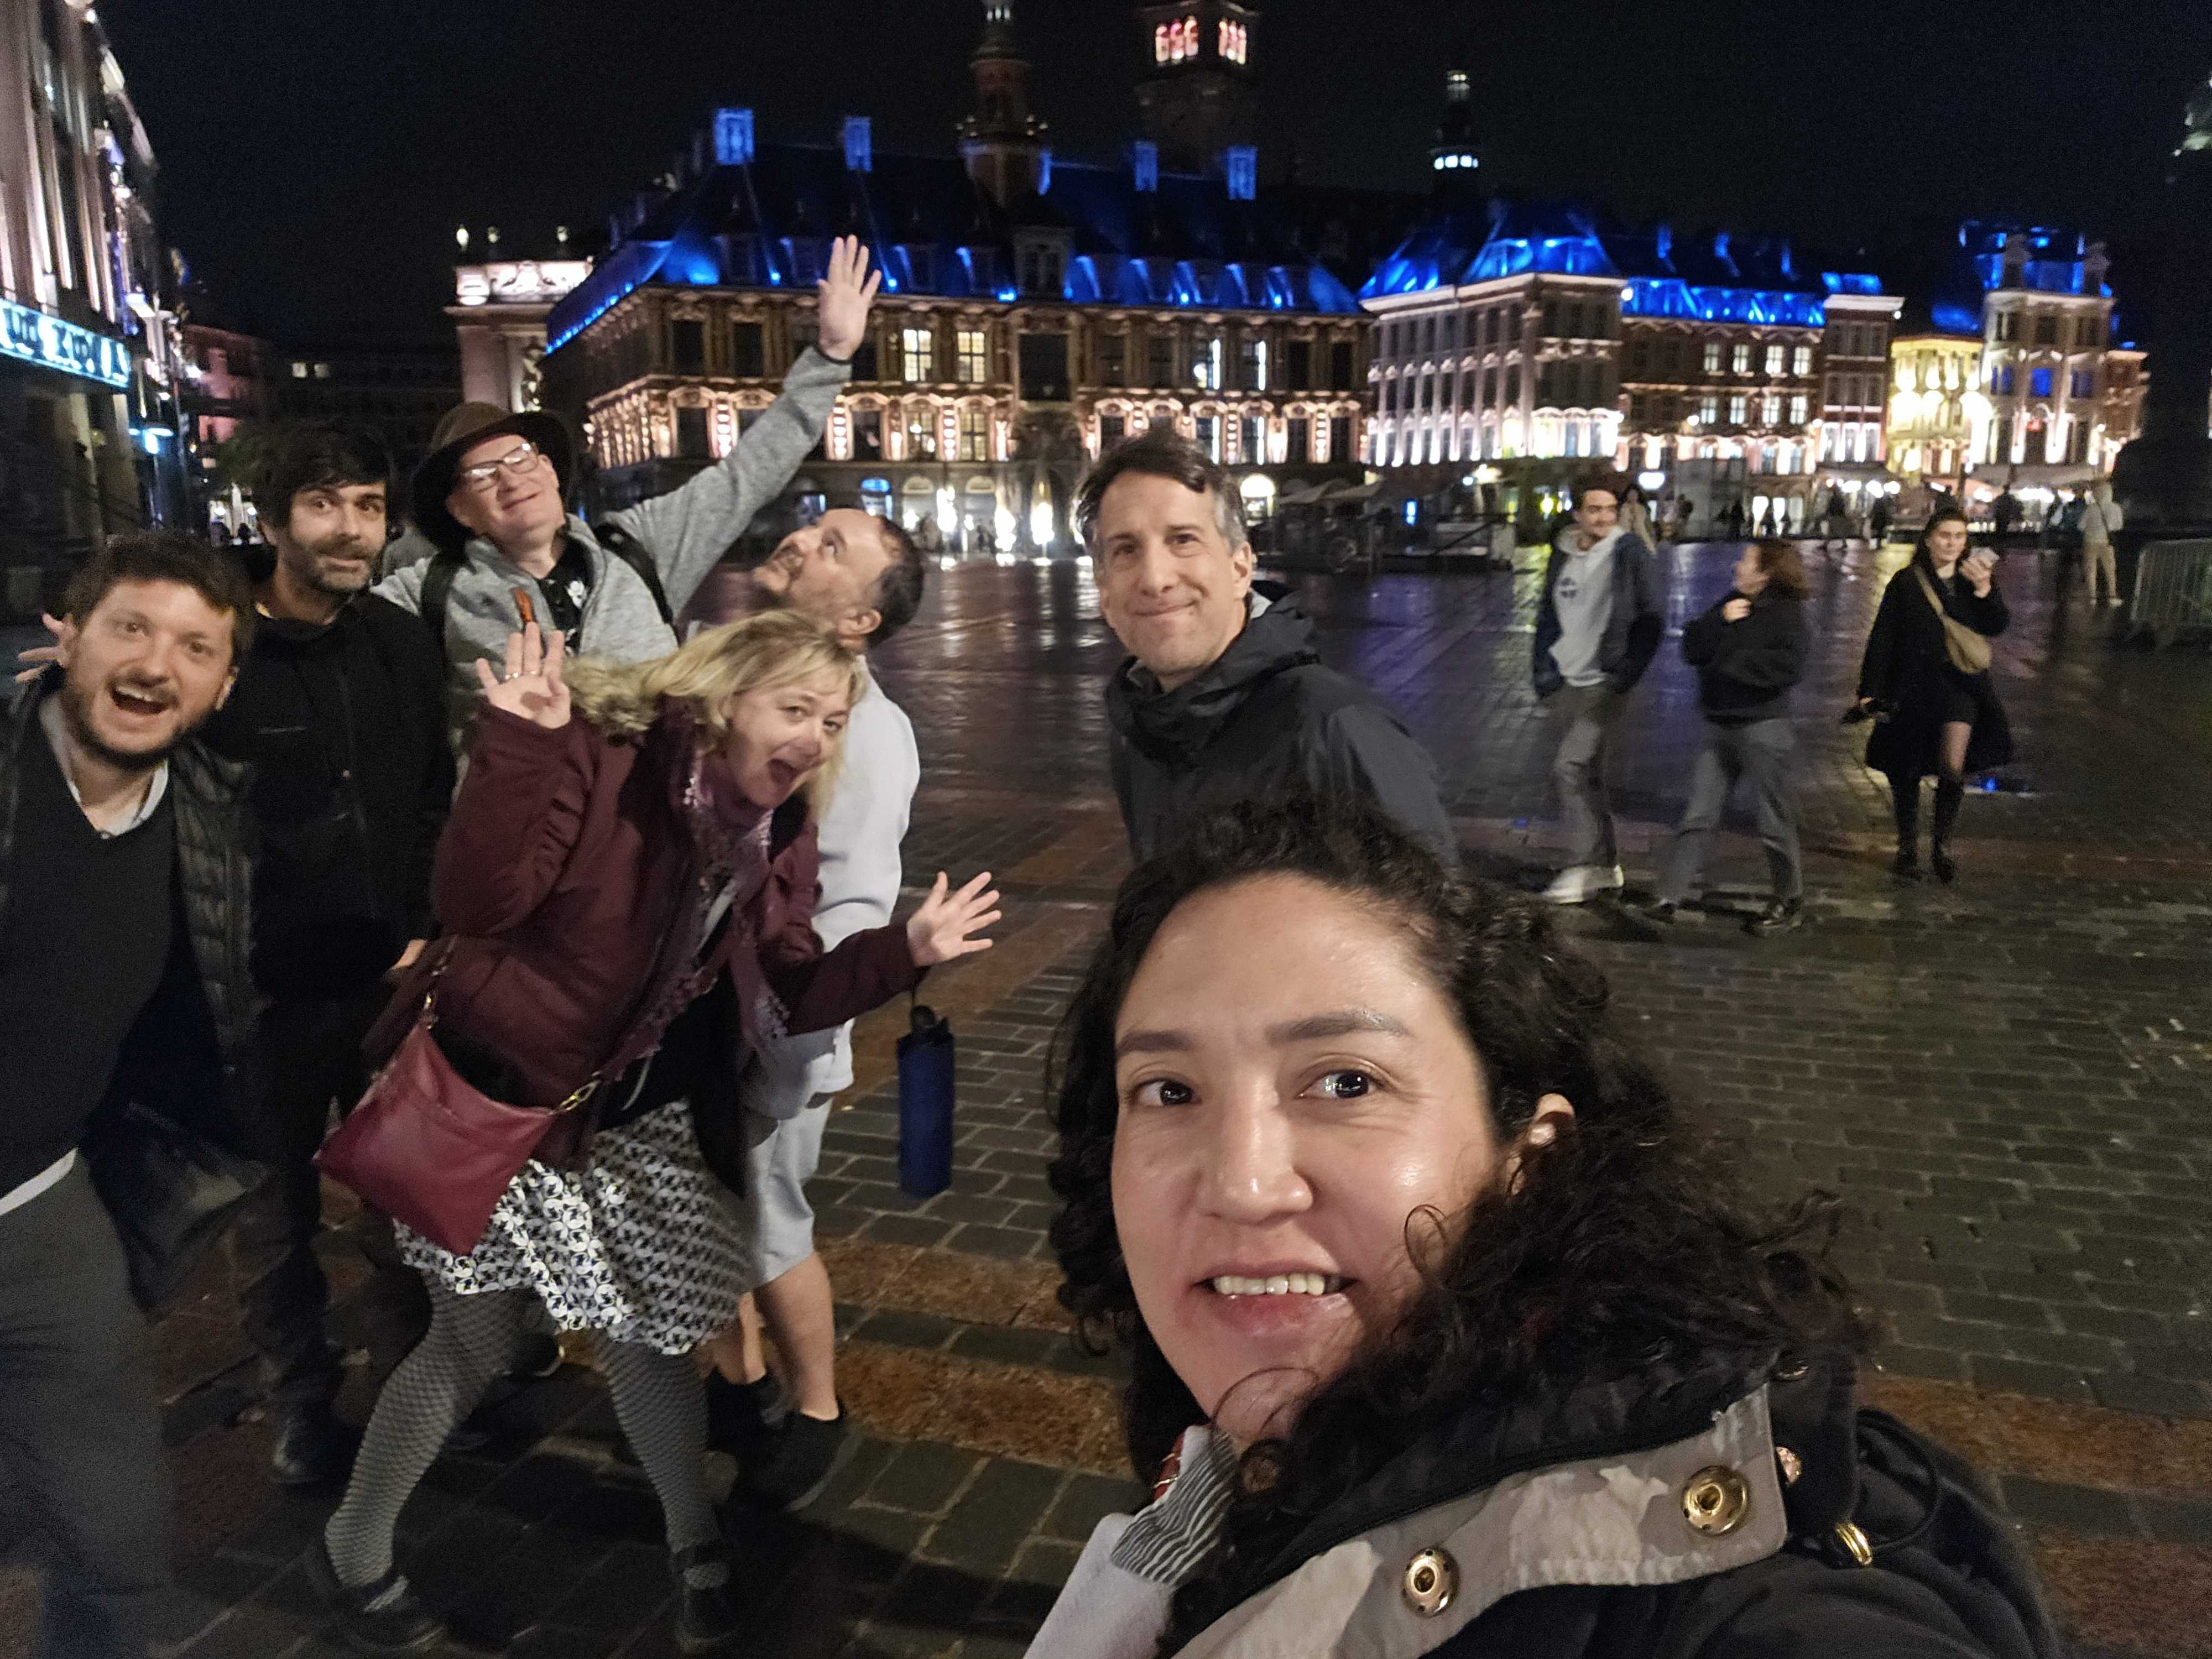 Selfie in the square by Jordana Fung